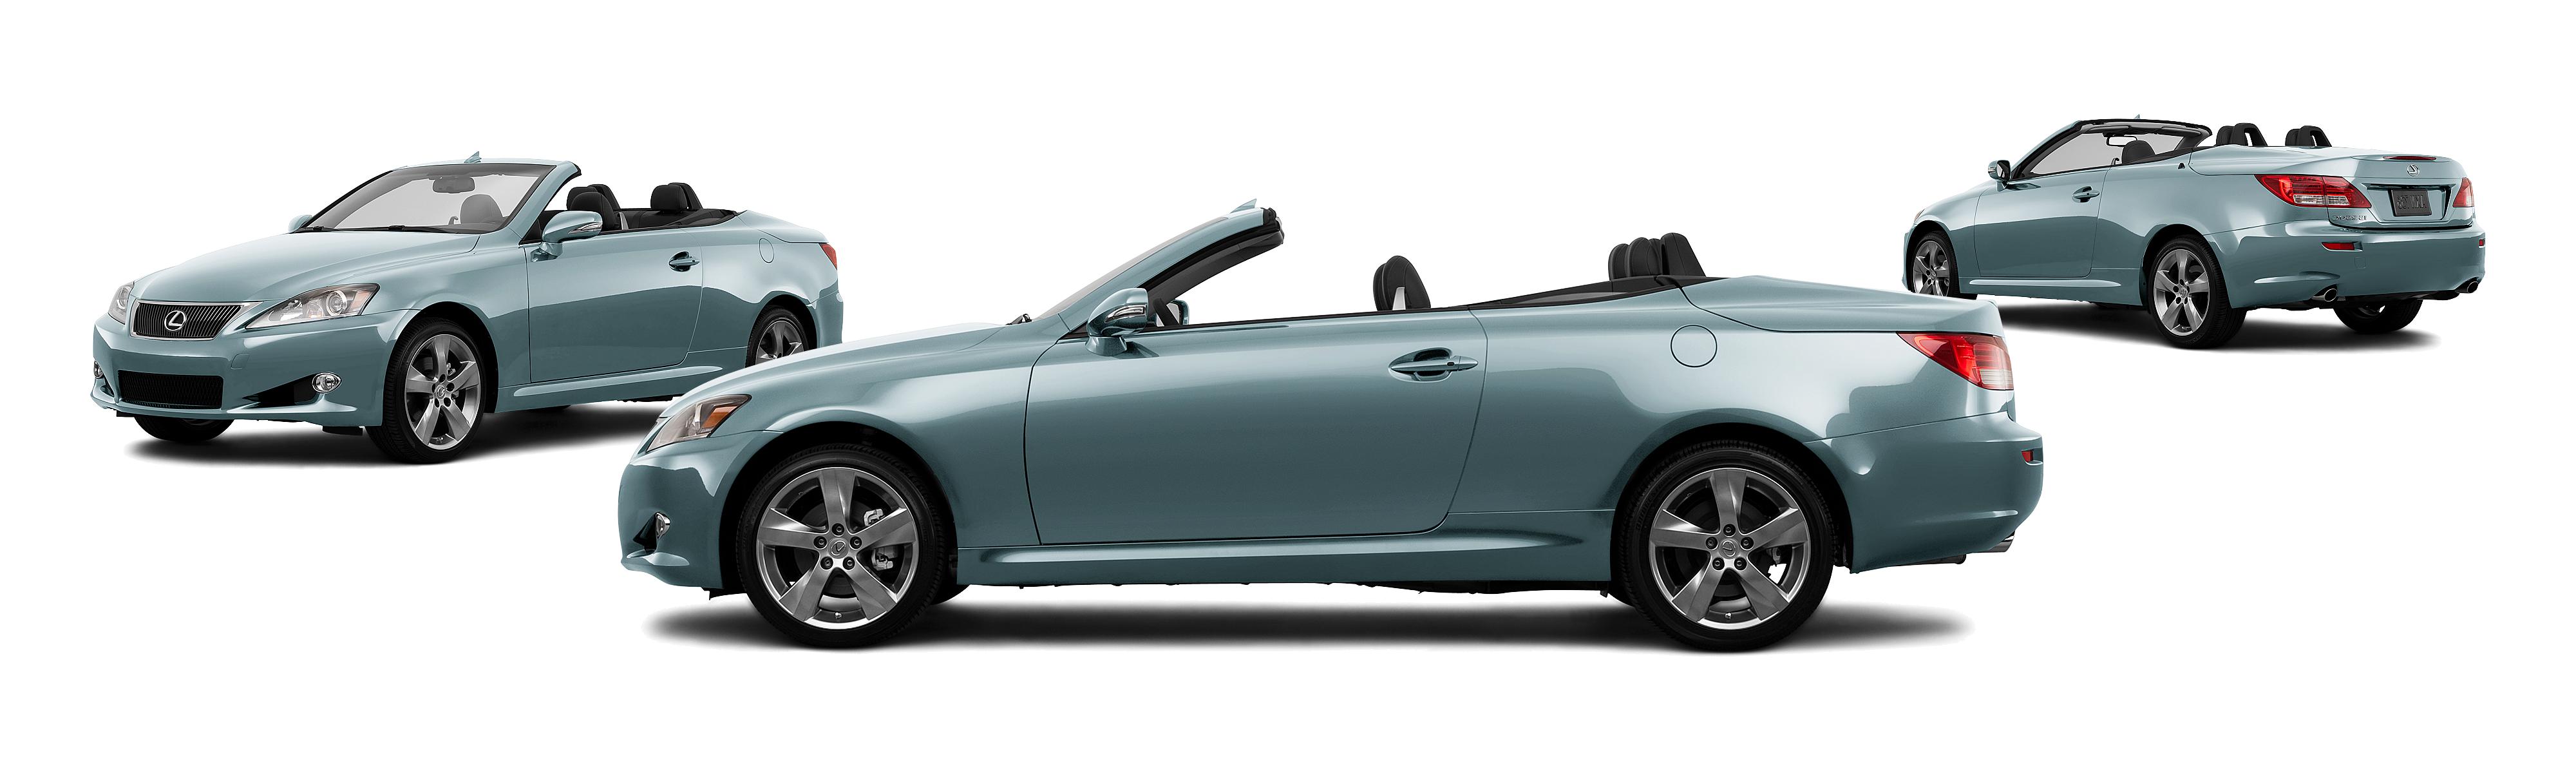 2011 Lexus IS 250C 2dr Convertible 6A - Research - GrooveCar